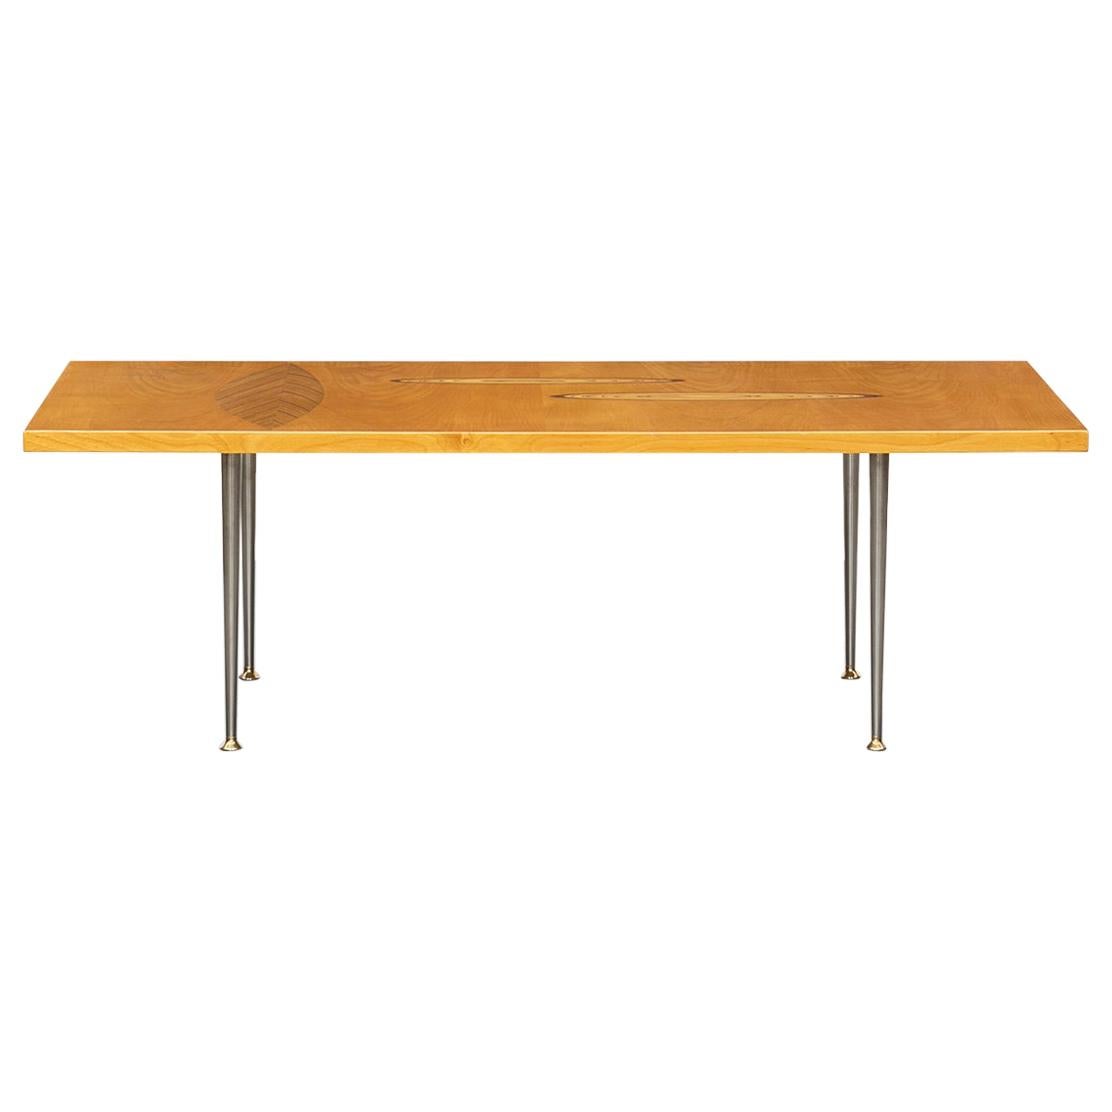 1950s Brown Wooden Coffee Table by Tapio Wirkkala 'd' For Sale